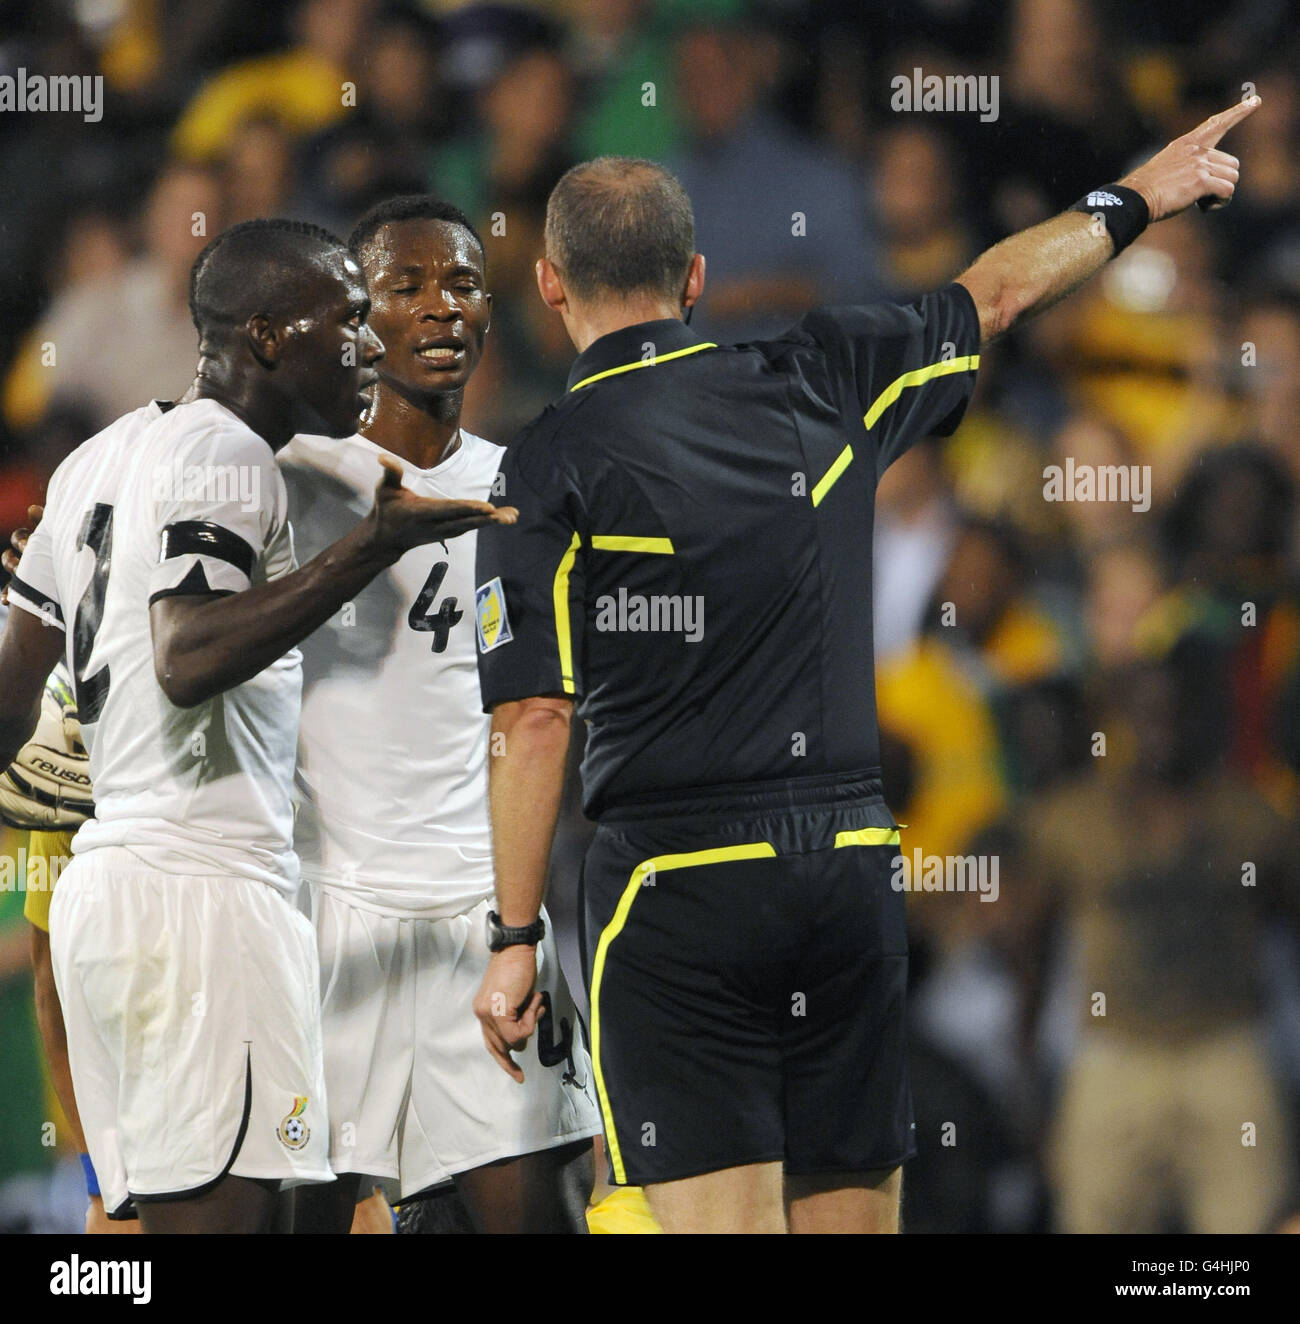 Soccer - International Friendly - Brazil v Ghana - Craven Cottage. Ghana's Daniel Opare (left) protests to referee Mike Dean after being shown a red card against Brazil. Stock Photo